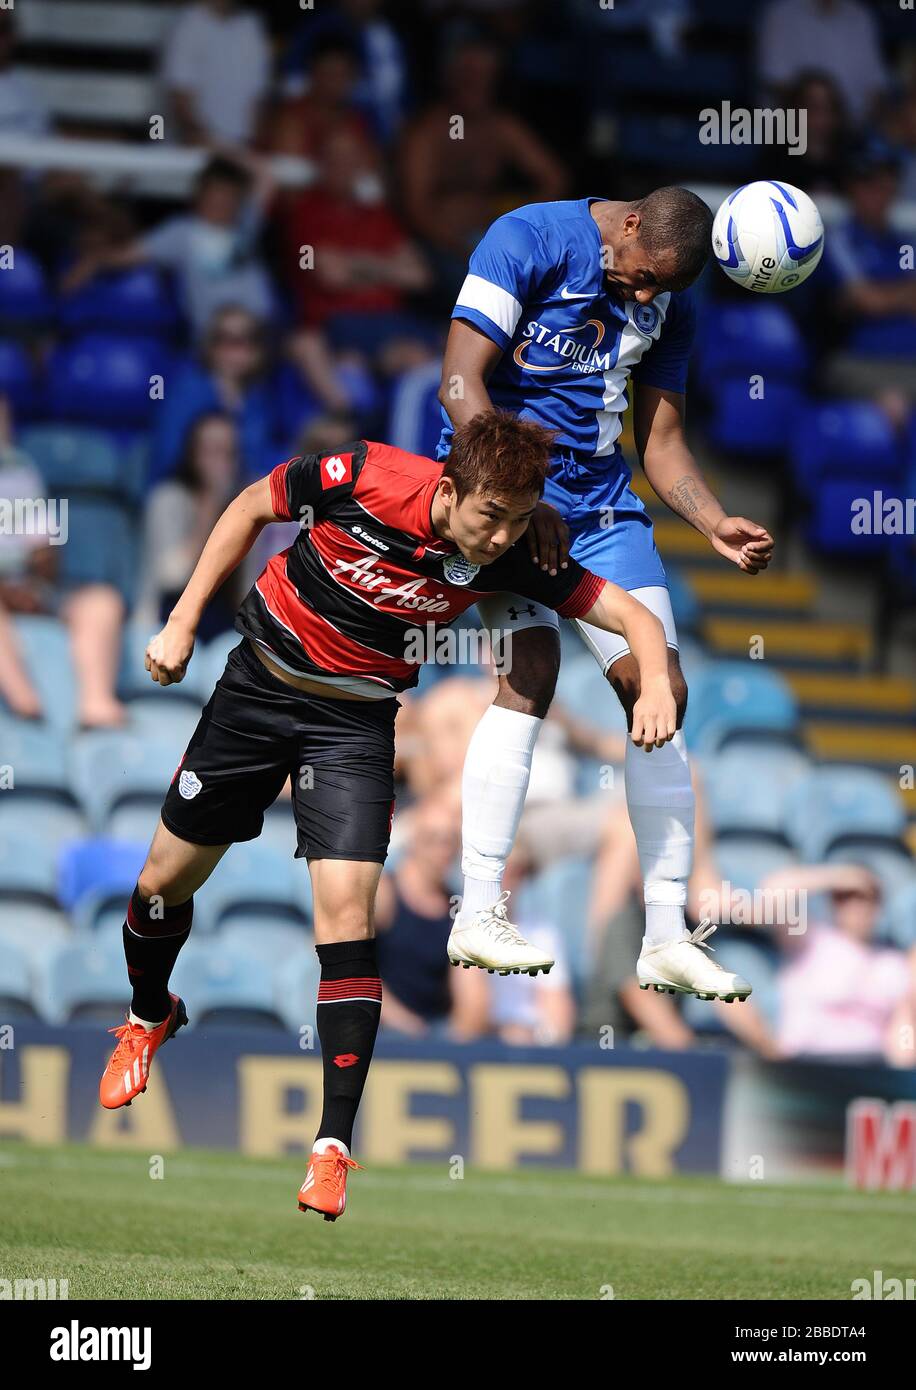 Peterborough United's Tyrone Barnett wins the ball in the air from Queens Park Rangers' Yun-Suk Young Stock Photo